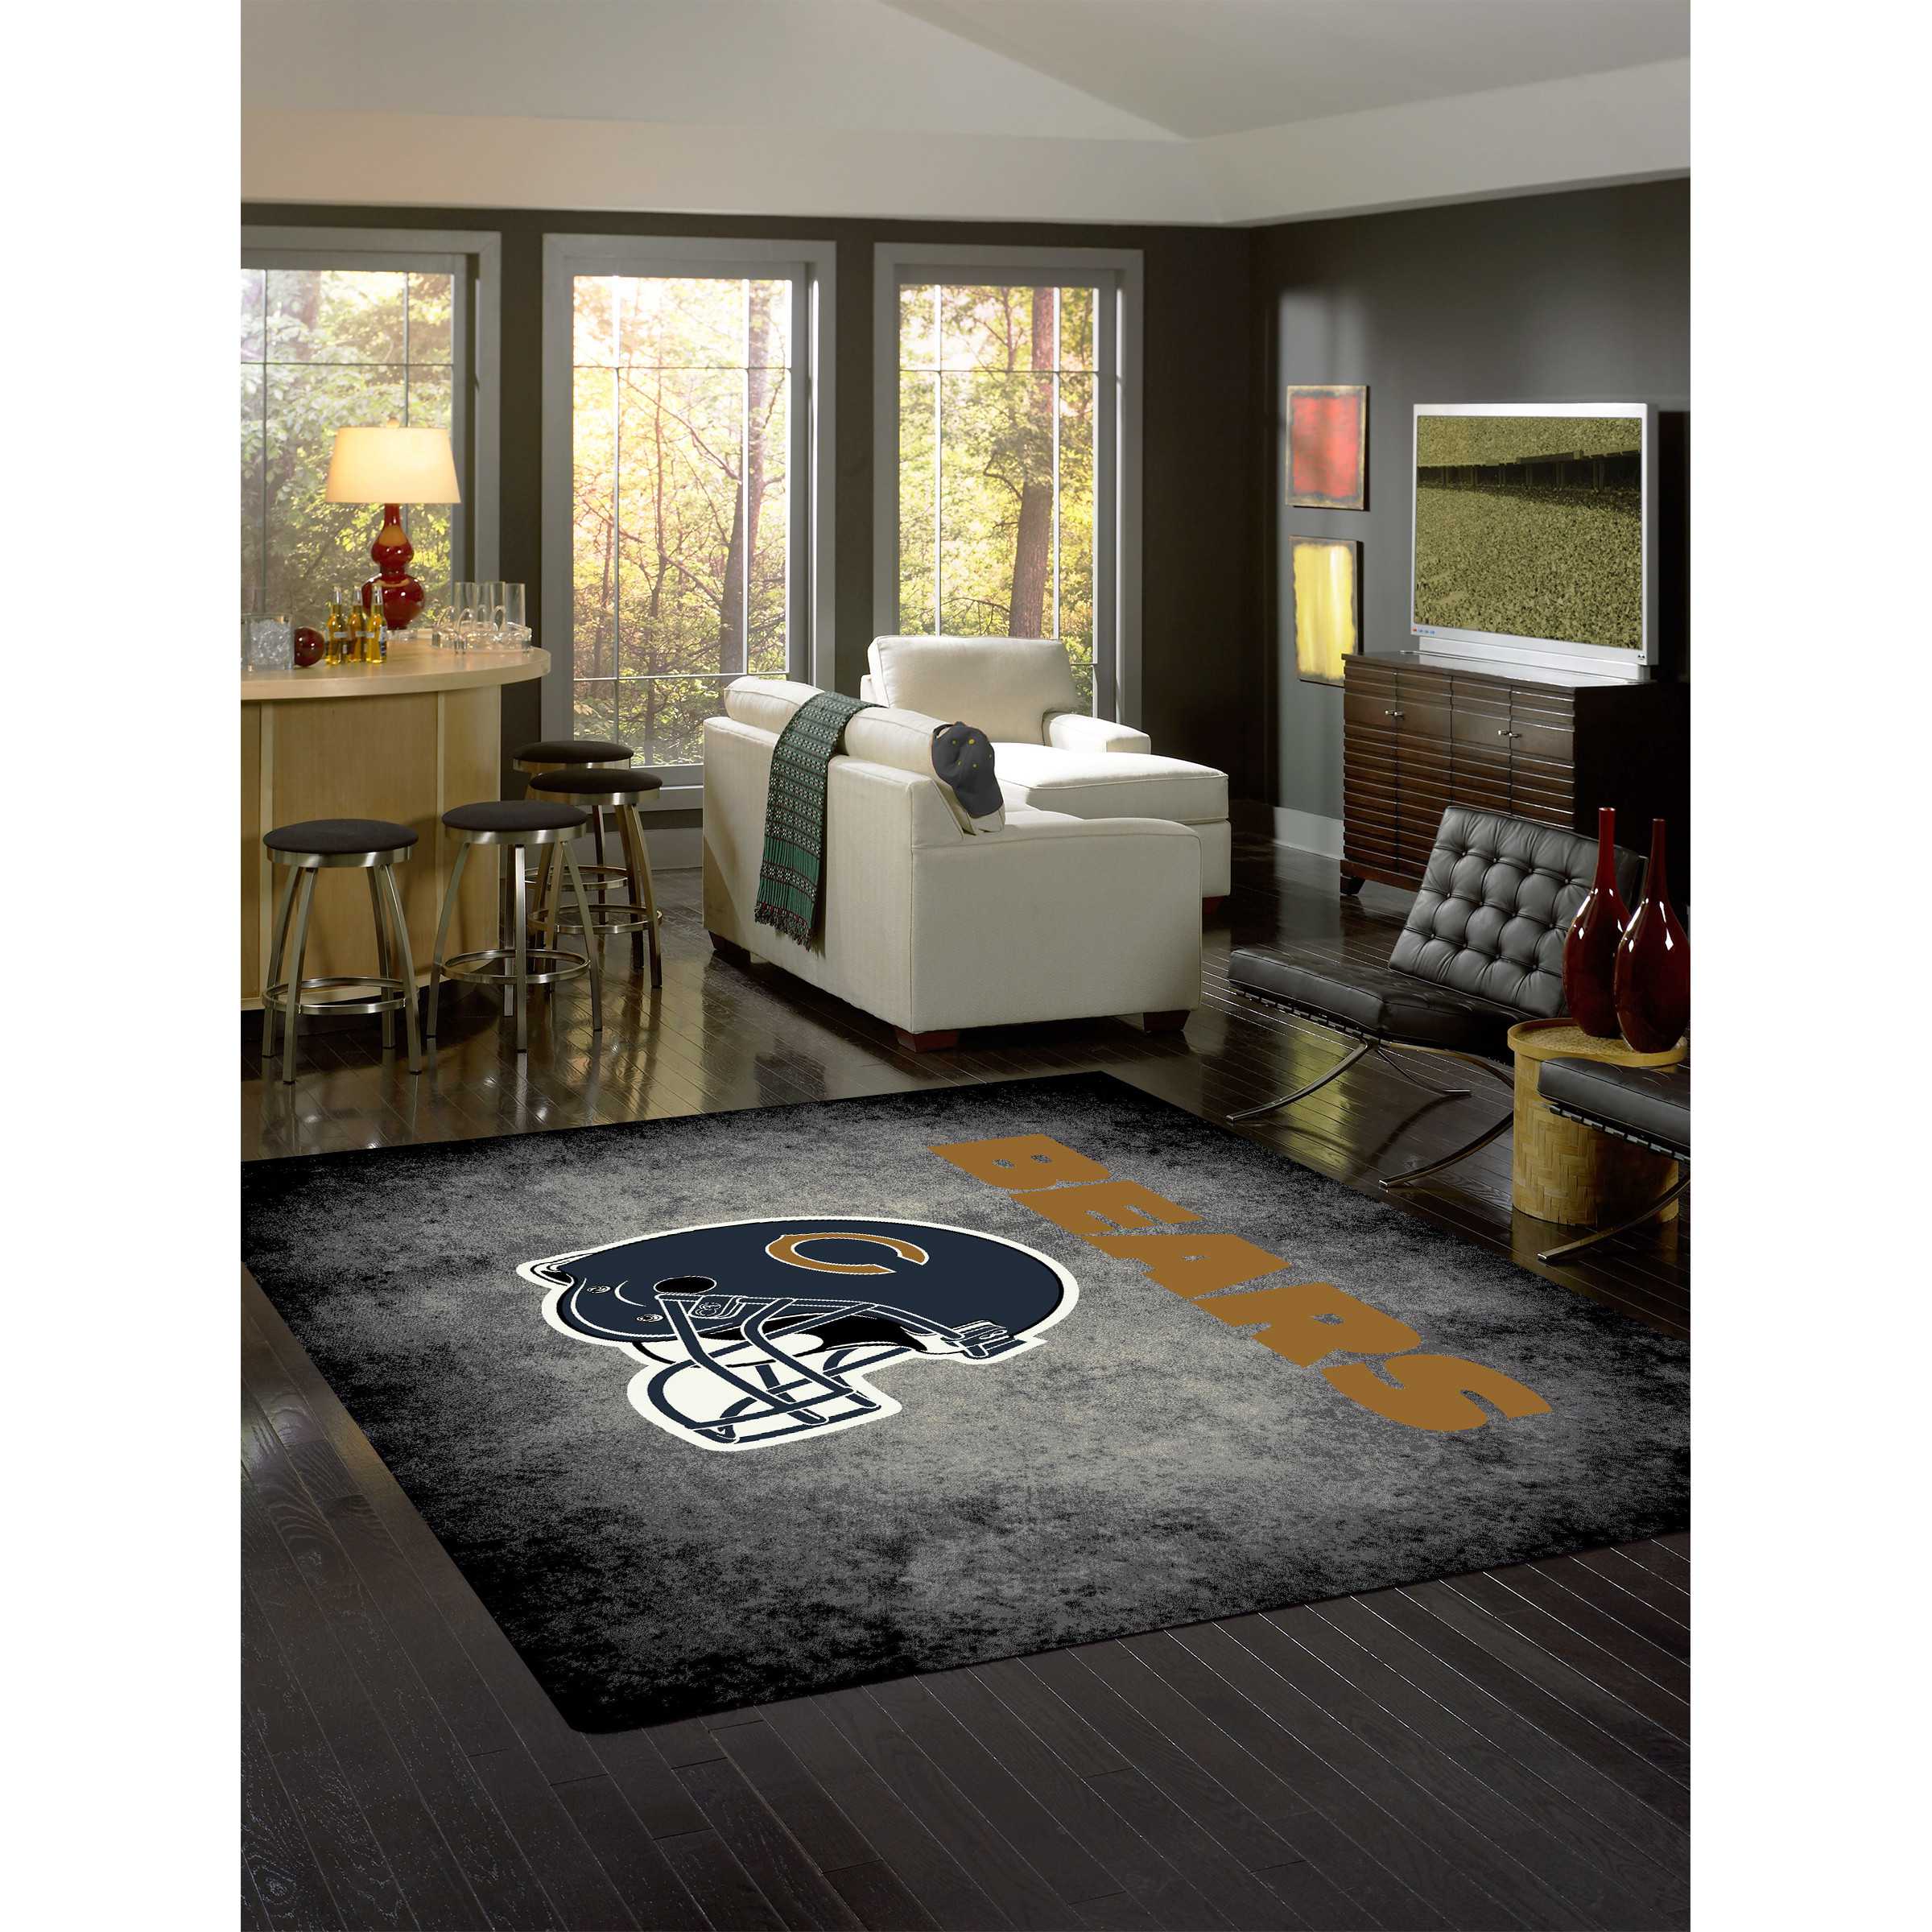 CHICAGO BEARS 8X11 DISTRESSED RUG